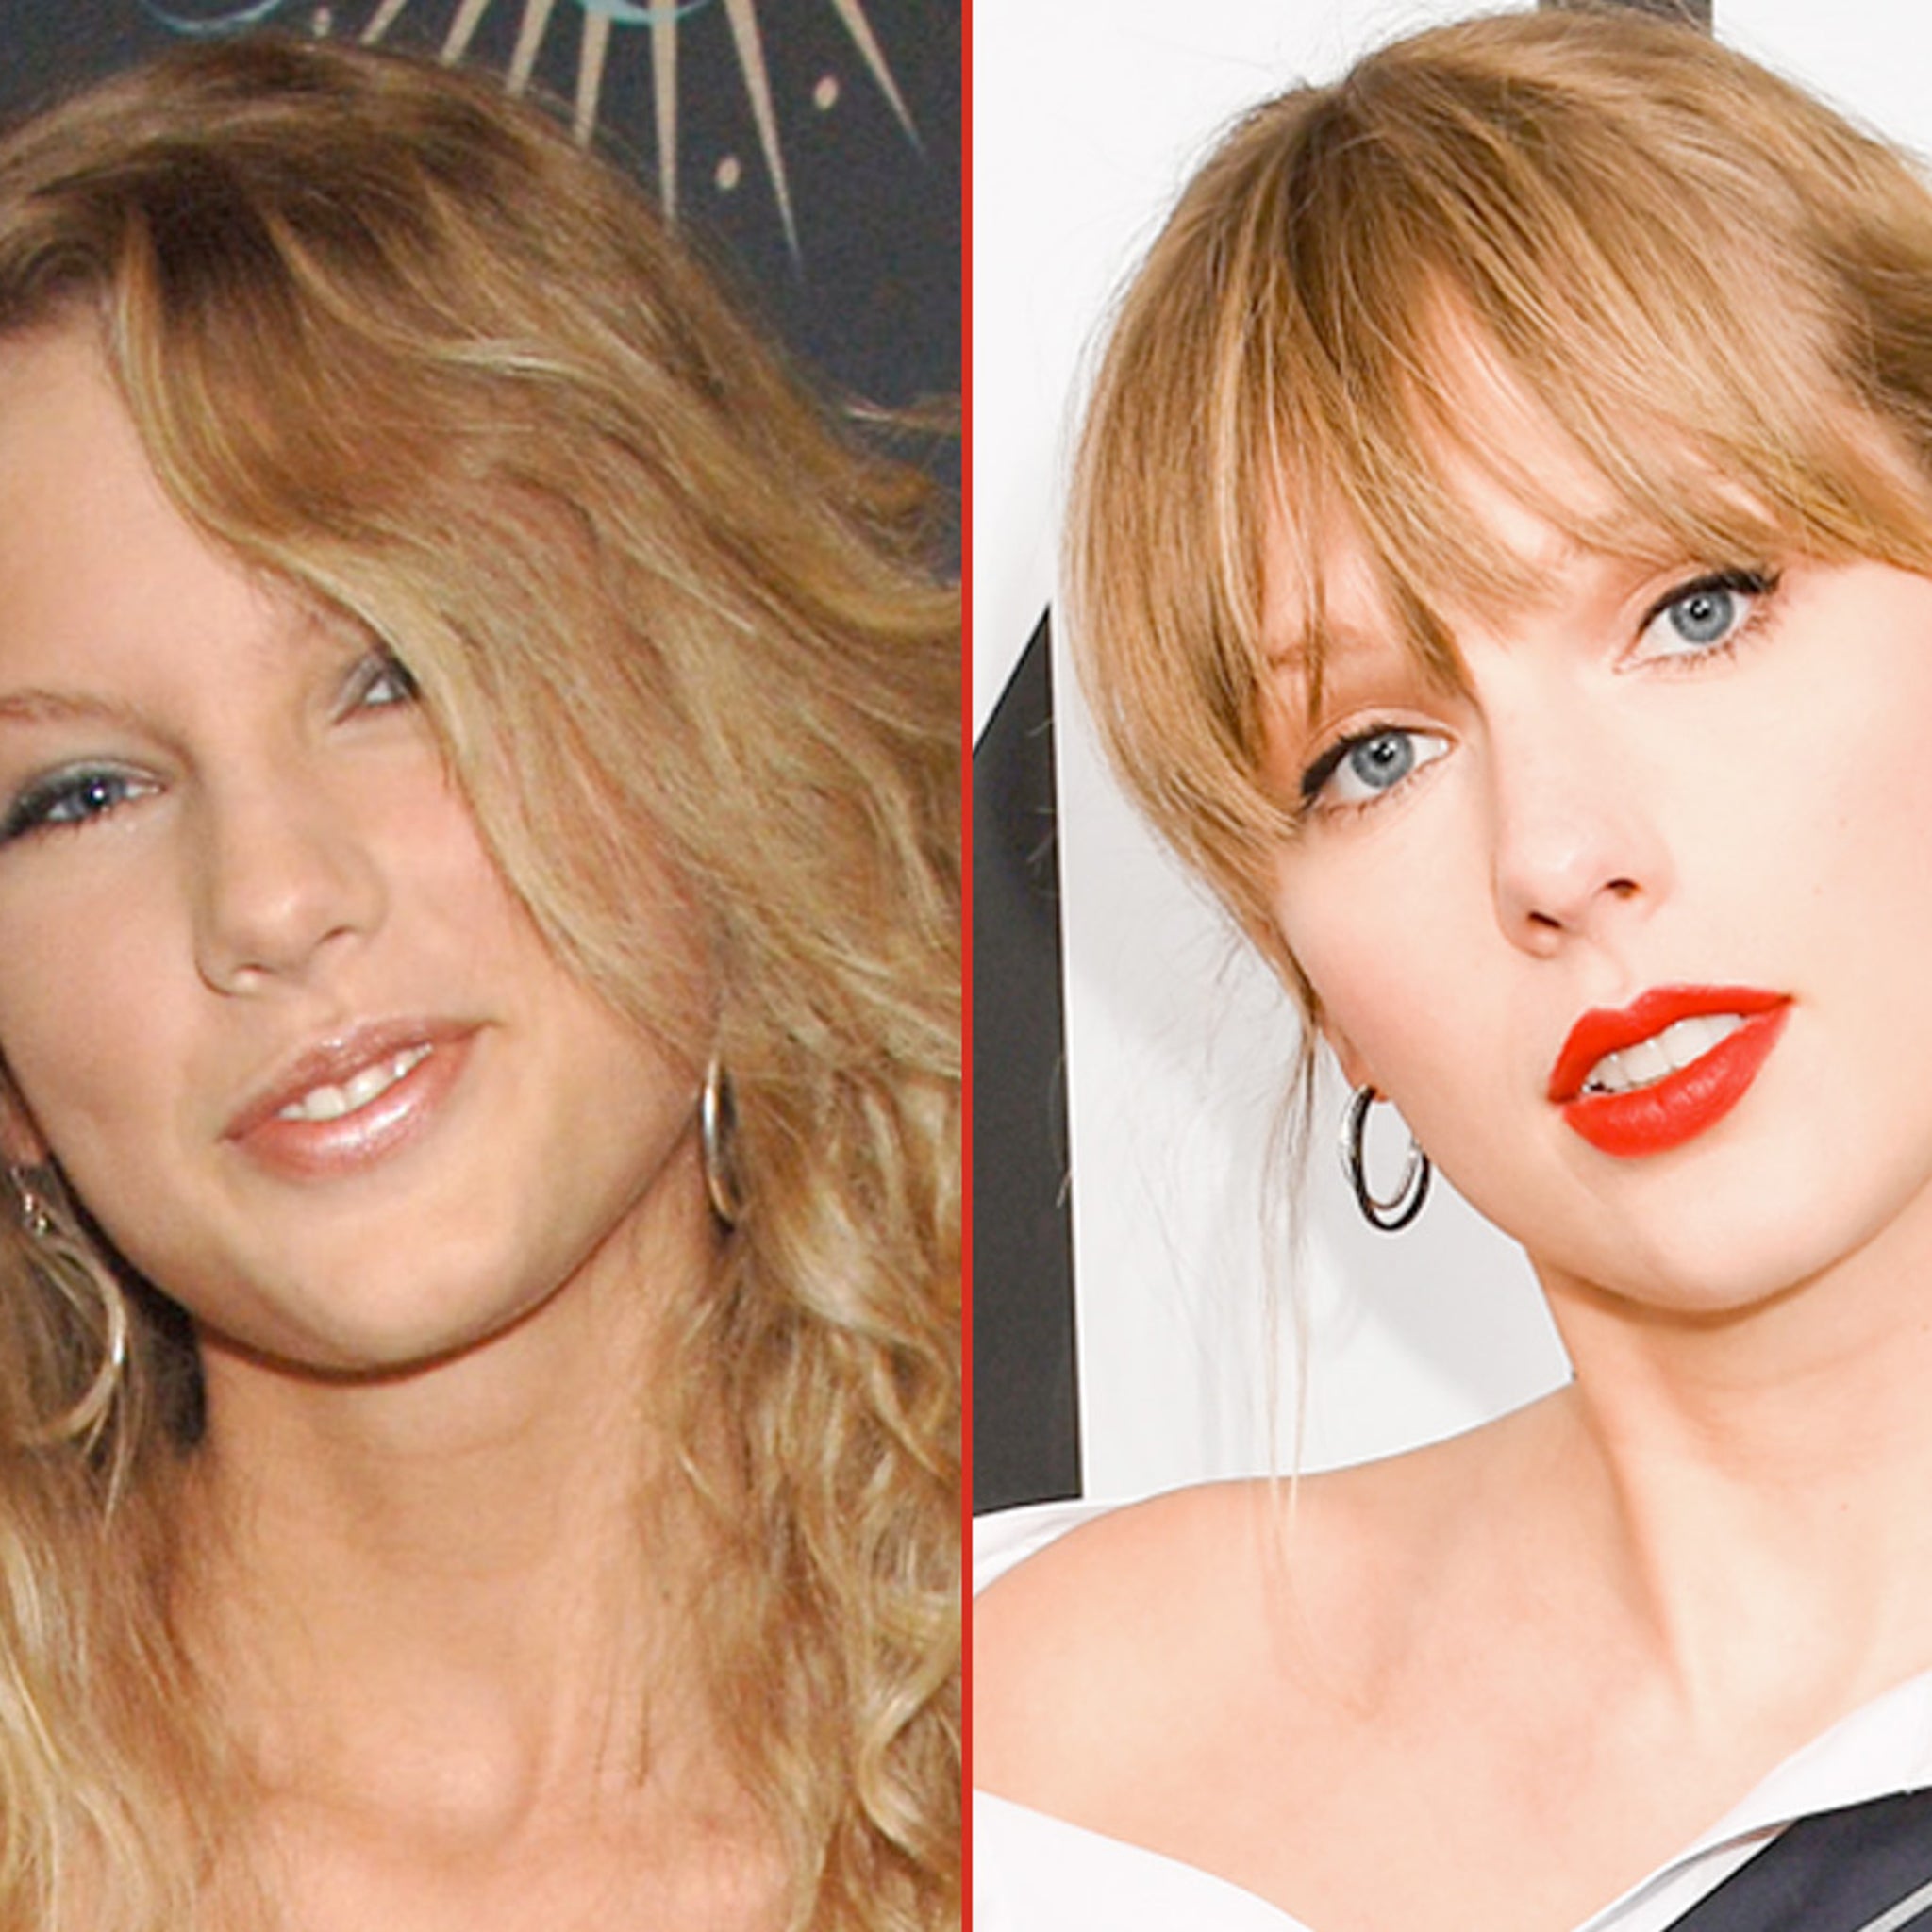 Taylor Swift Pictures From 2008 Are Compared With Pictures From 2023 As The  Internet Asks If She Has 'Good Genes' Or 'Good Docs' - SHEfinds